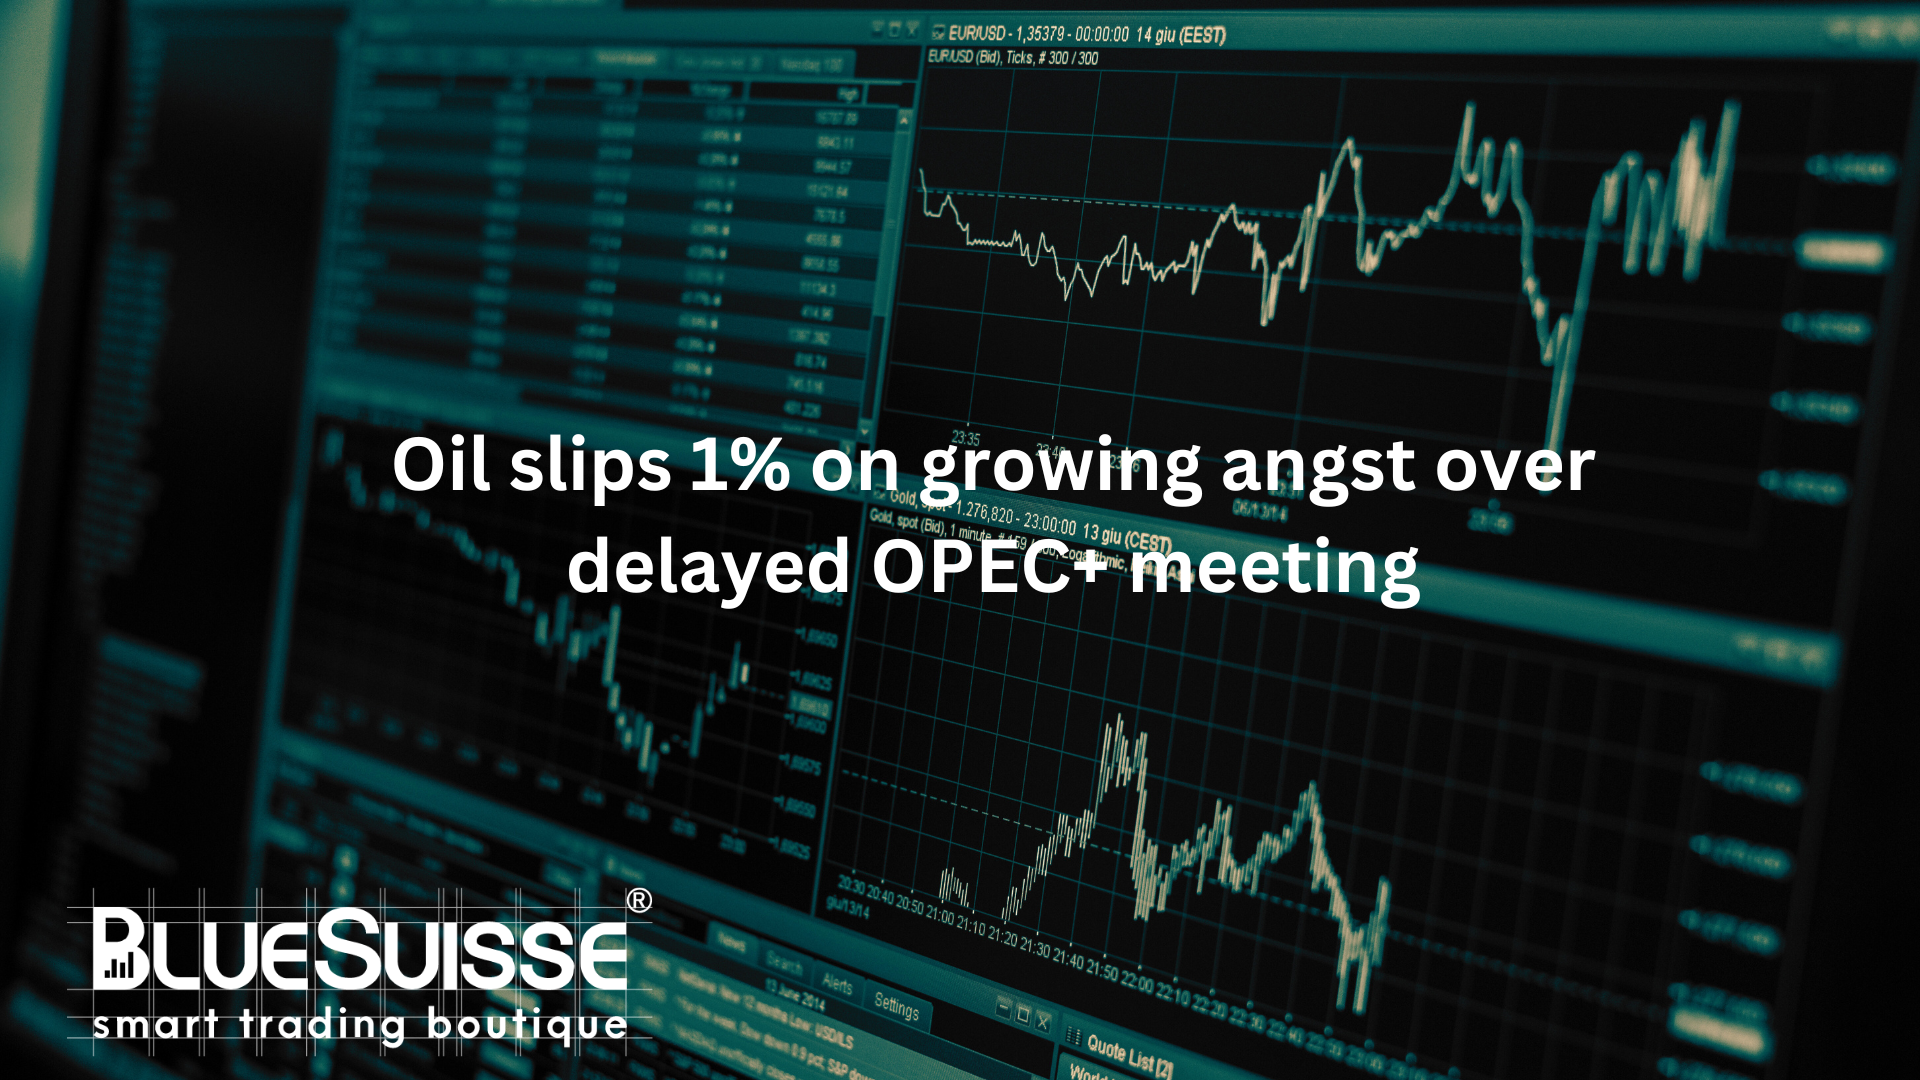 Oil slips 1% on growing angst over delayed OPEC+ meeting